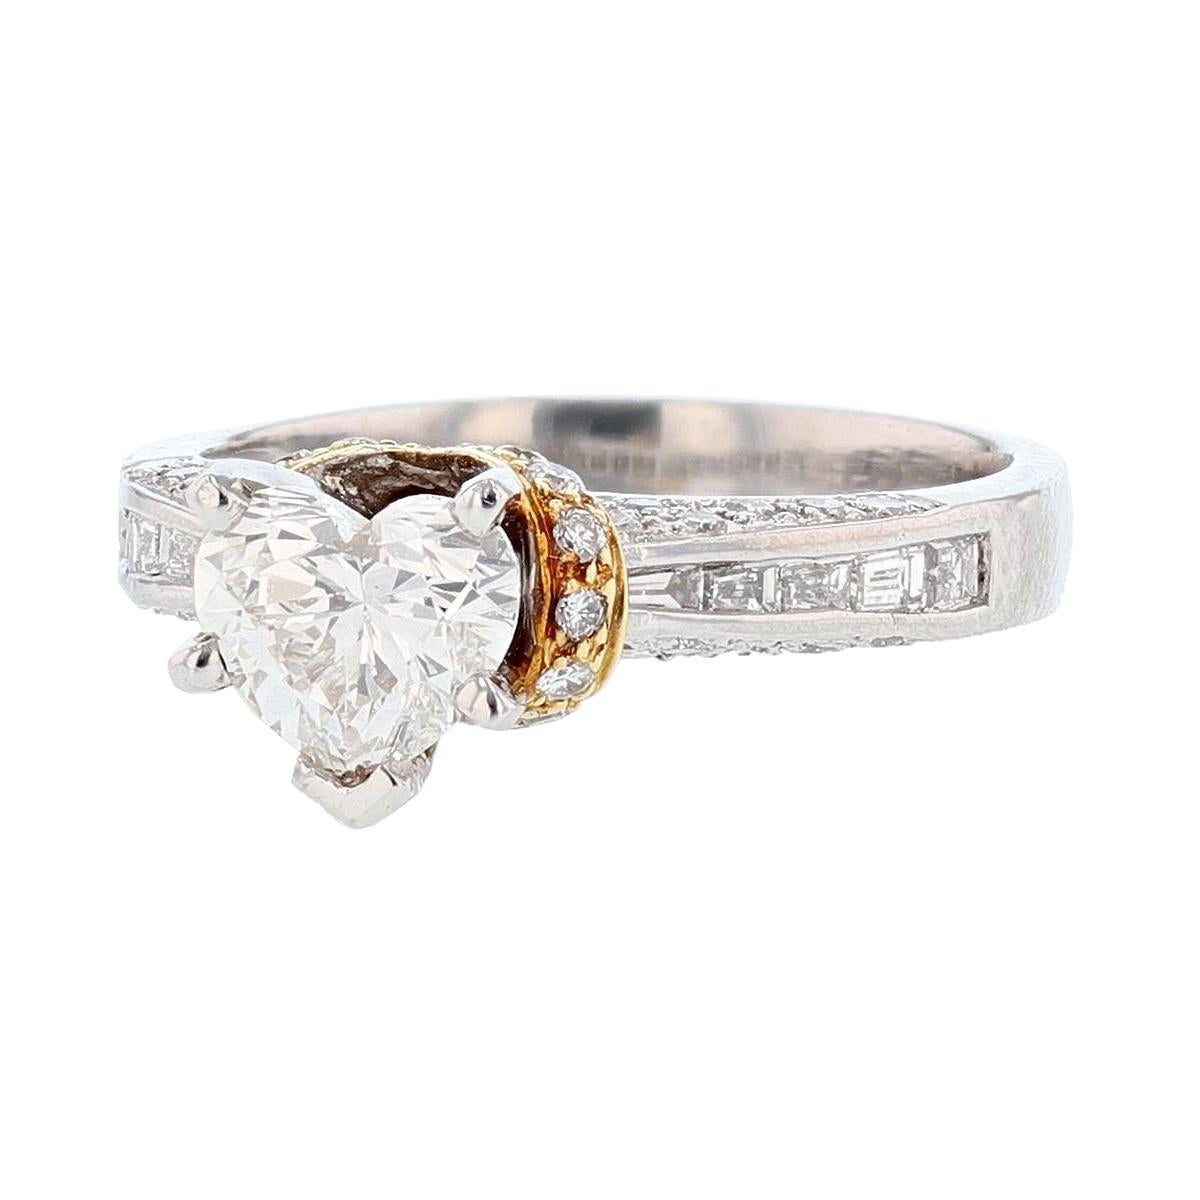 This ring is made in Platinum and 18 Karat Yellow Gold featuring a Heart Shaped Diamond. The center diamond is a 0.91 carat GIA certified Heart Shape Diamond with a color grade (H) and clarity grade (VS1). The certificate number is 